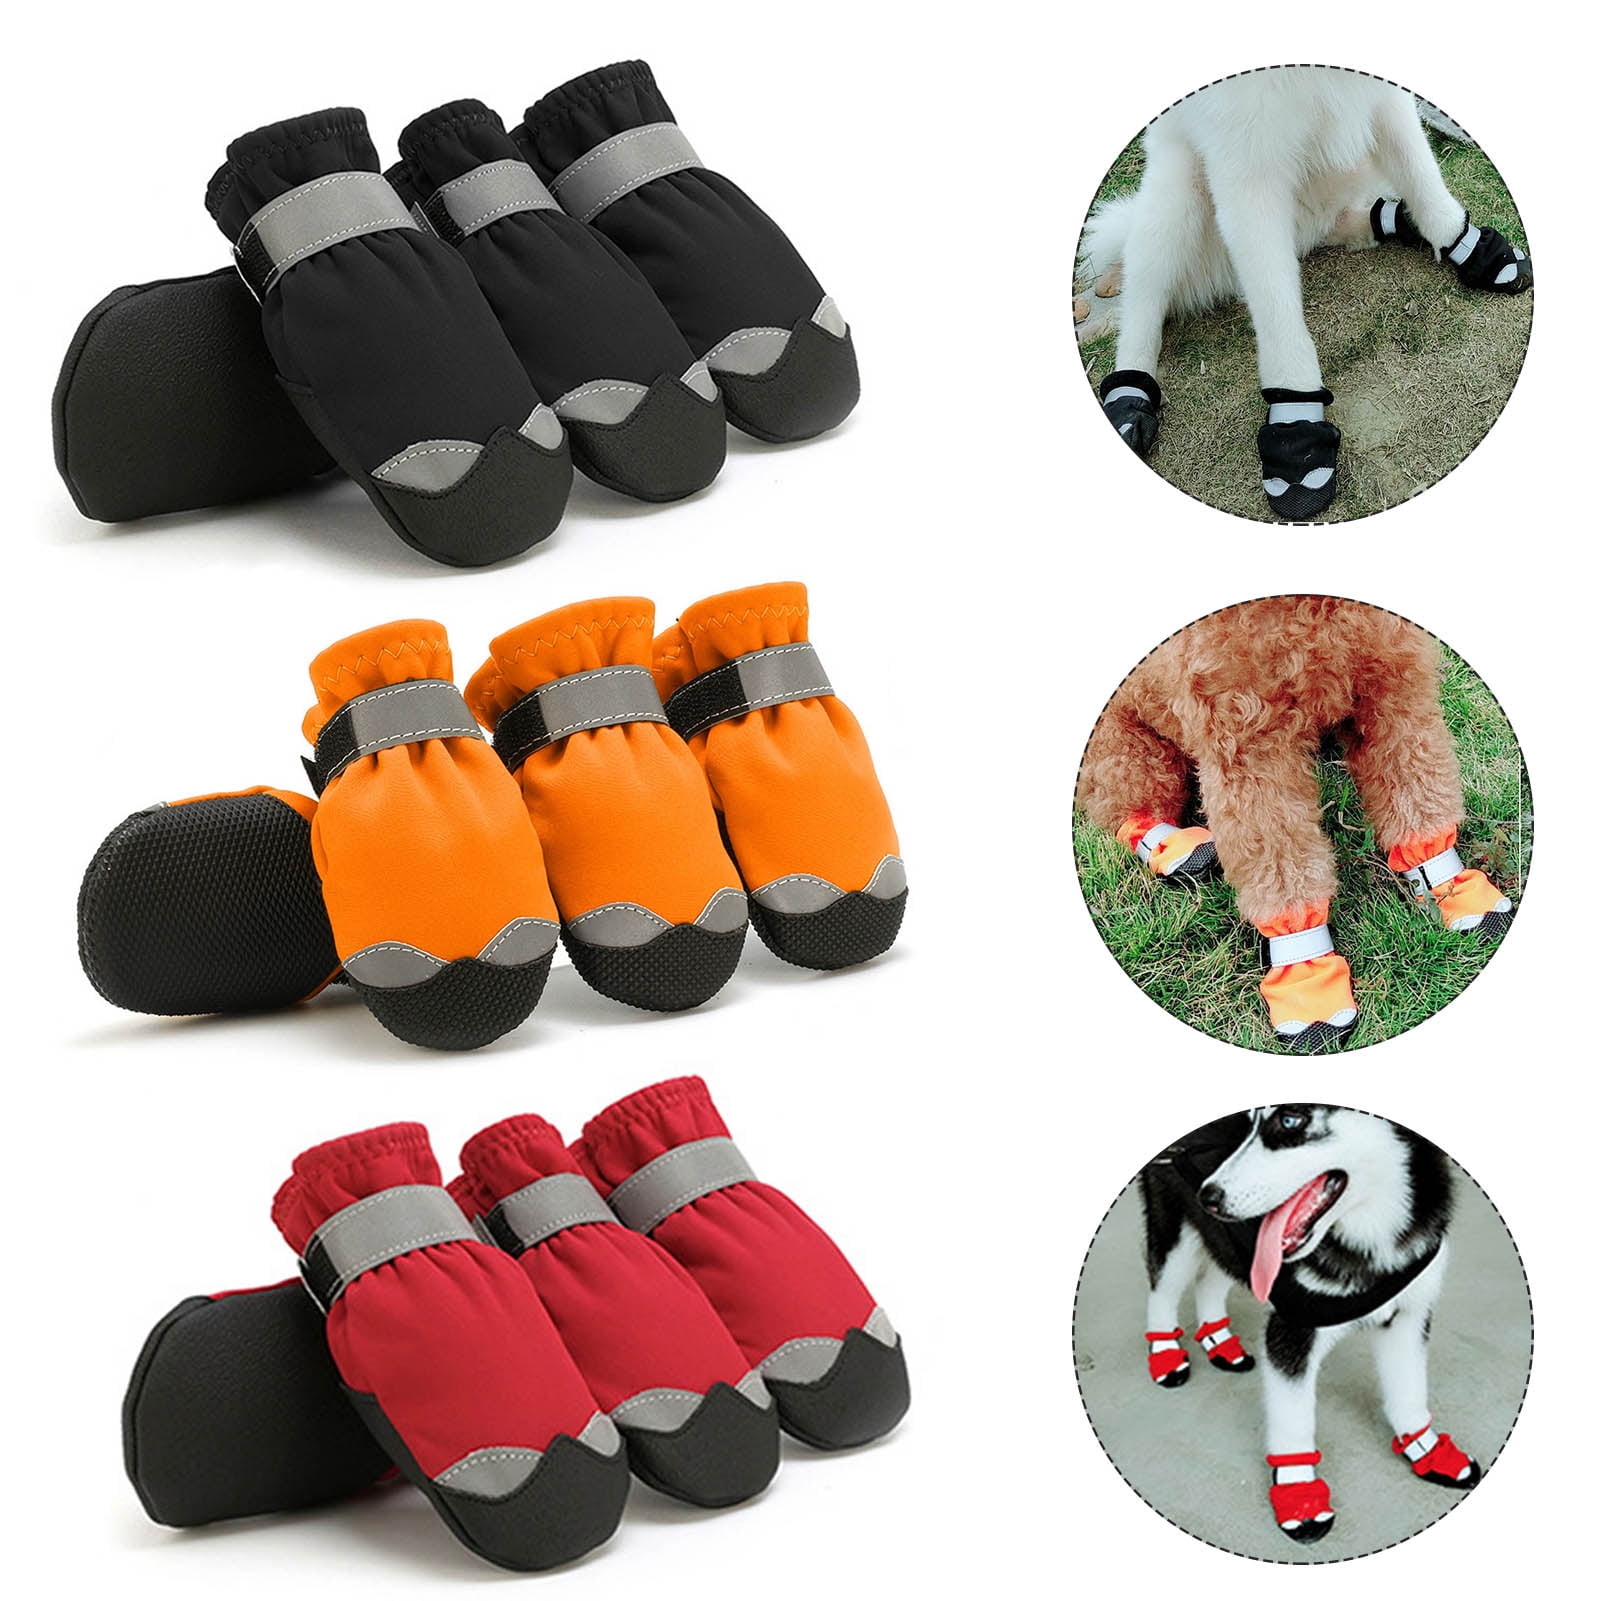 4x Anti Slip Puppy Dog Socks Boots Knitted Warm Indoor Cotton Shoes for Pets XXS 